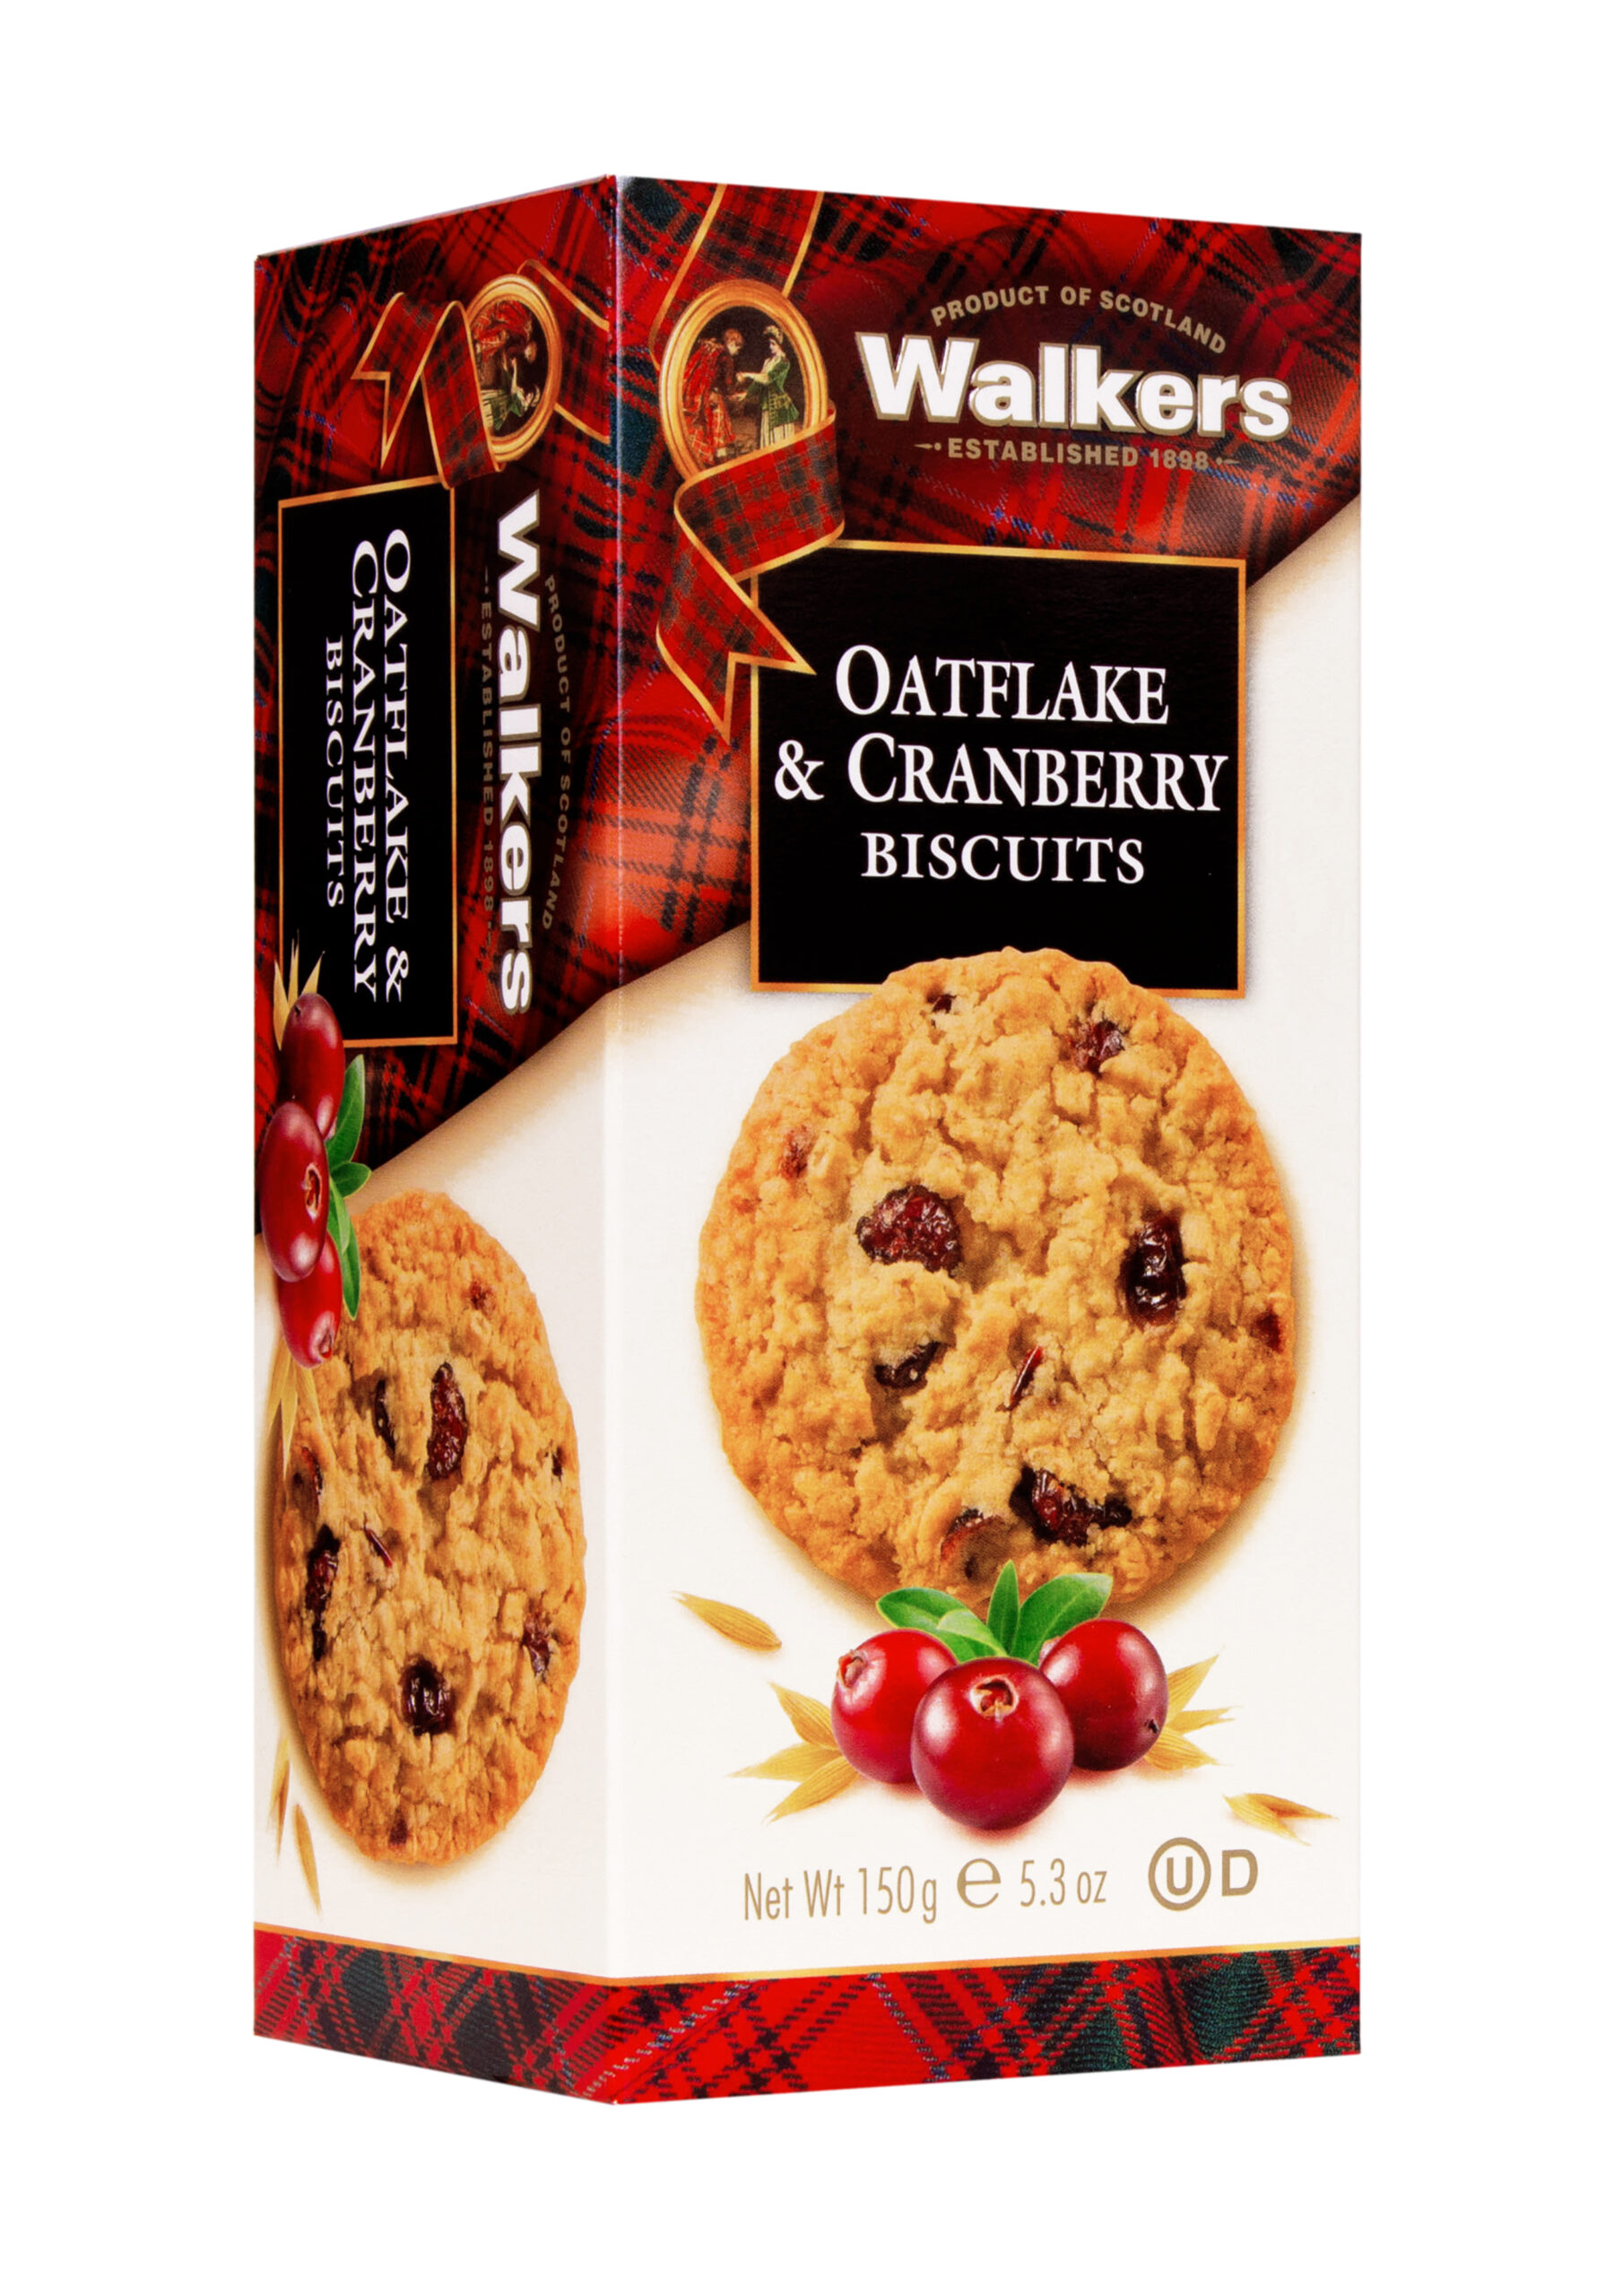 Carton Oatflake & Cranberry Biscuits.